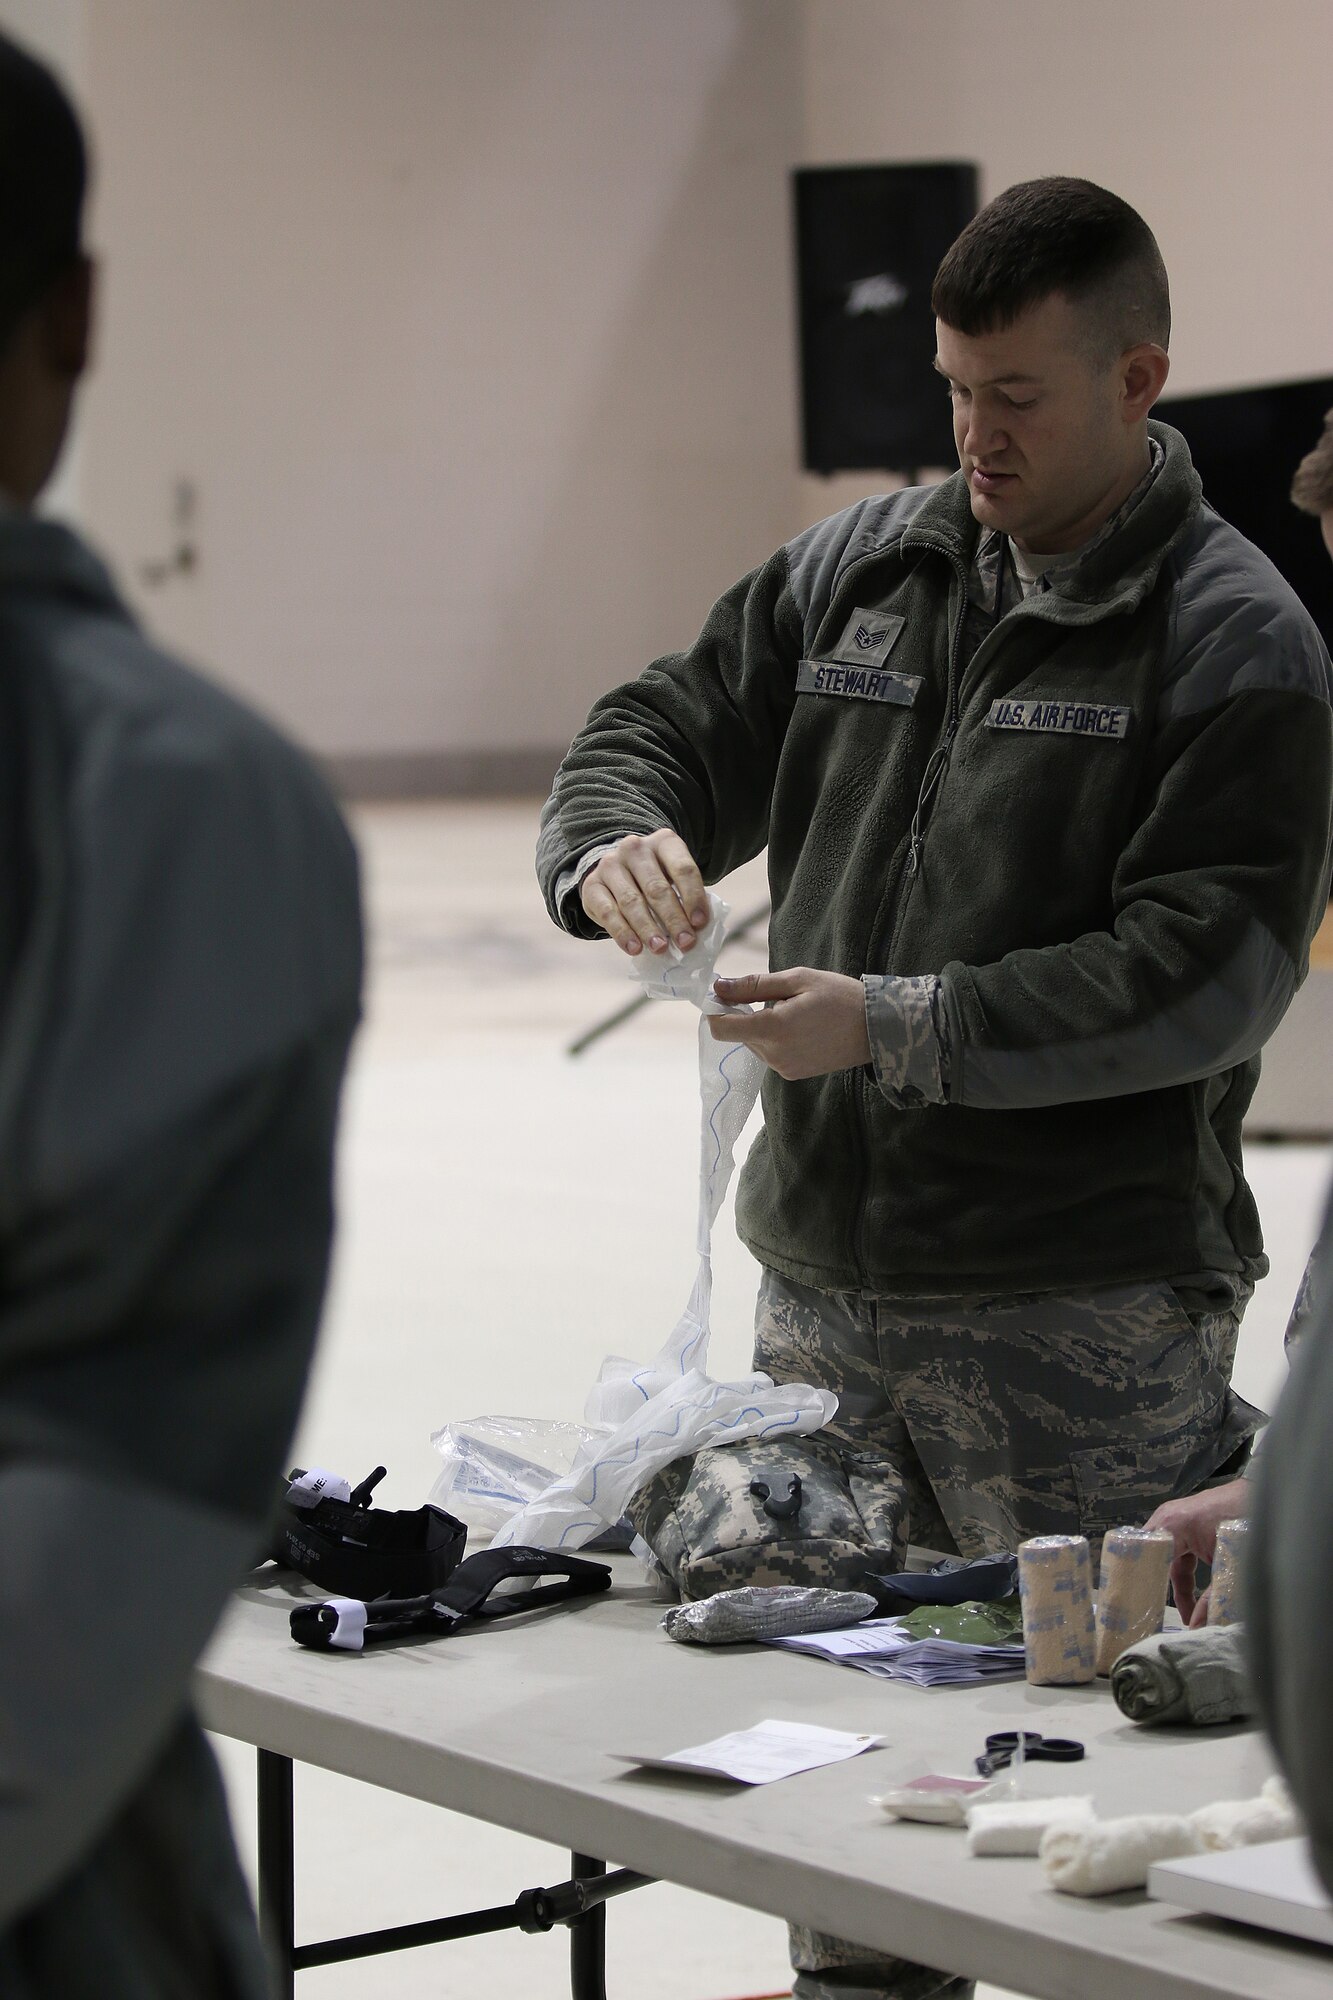 Staff Sgt. Adam Stewart, 445th Aircraft Maintenance Squadron mechanic, demonstrates how to use quick clot gauze during self-aid and buddy care training conducted during the Feb. 11, 2018 unit training assembly.